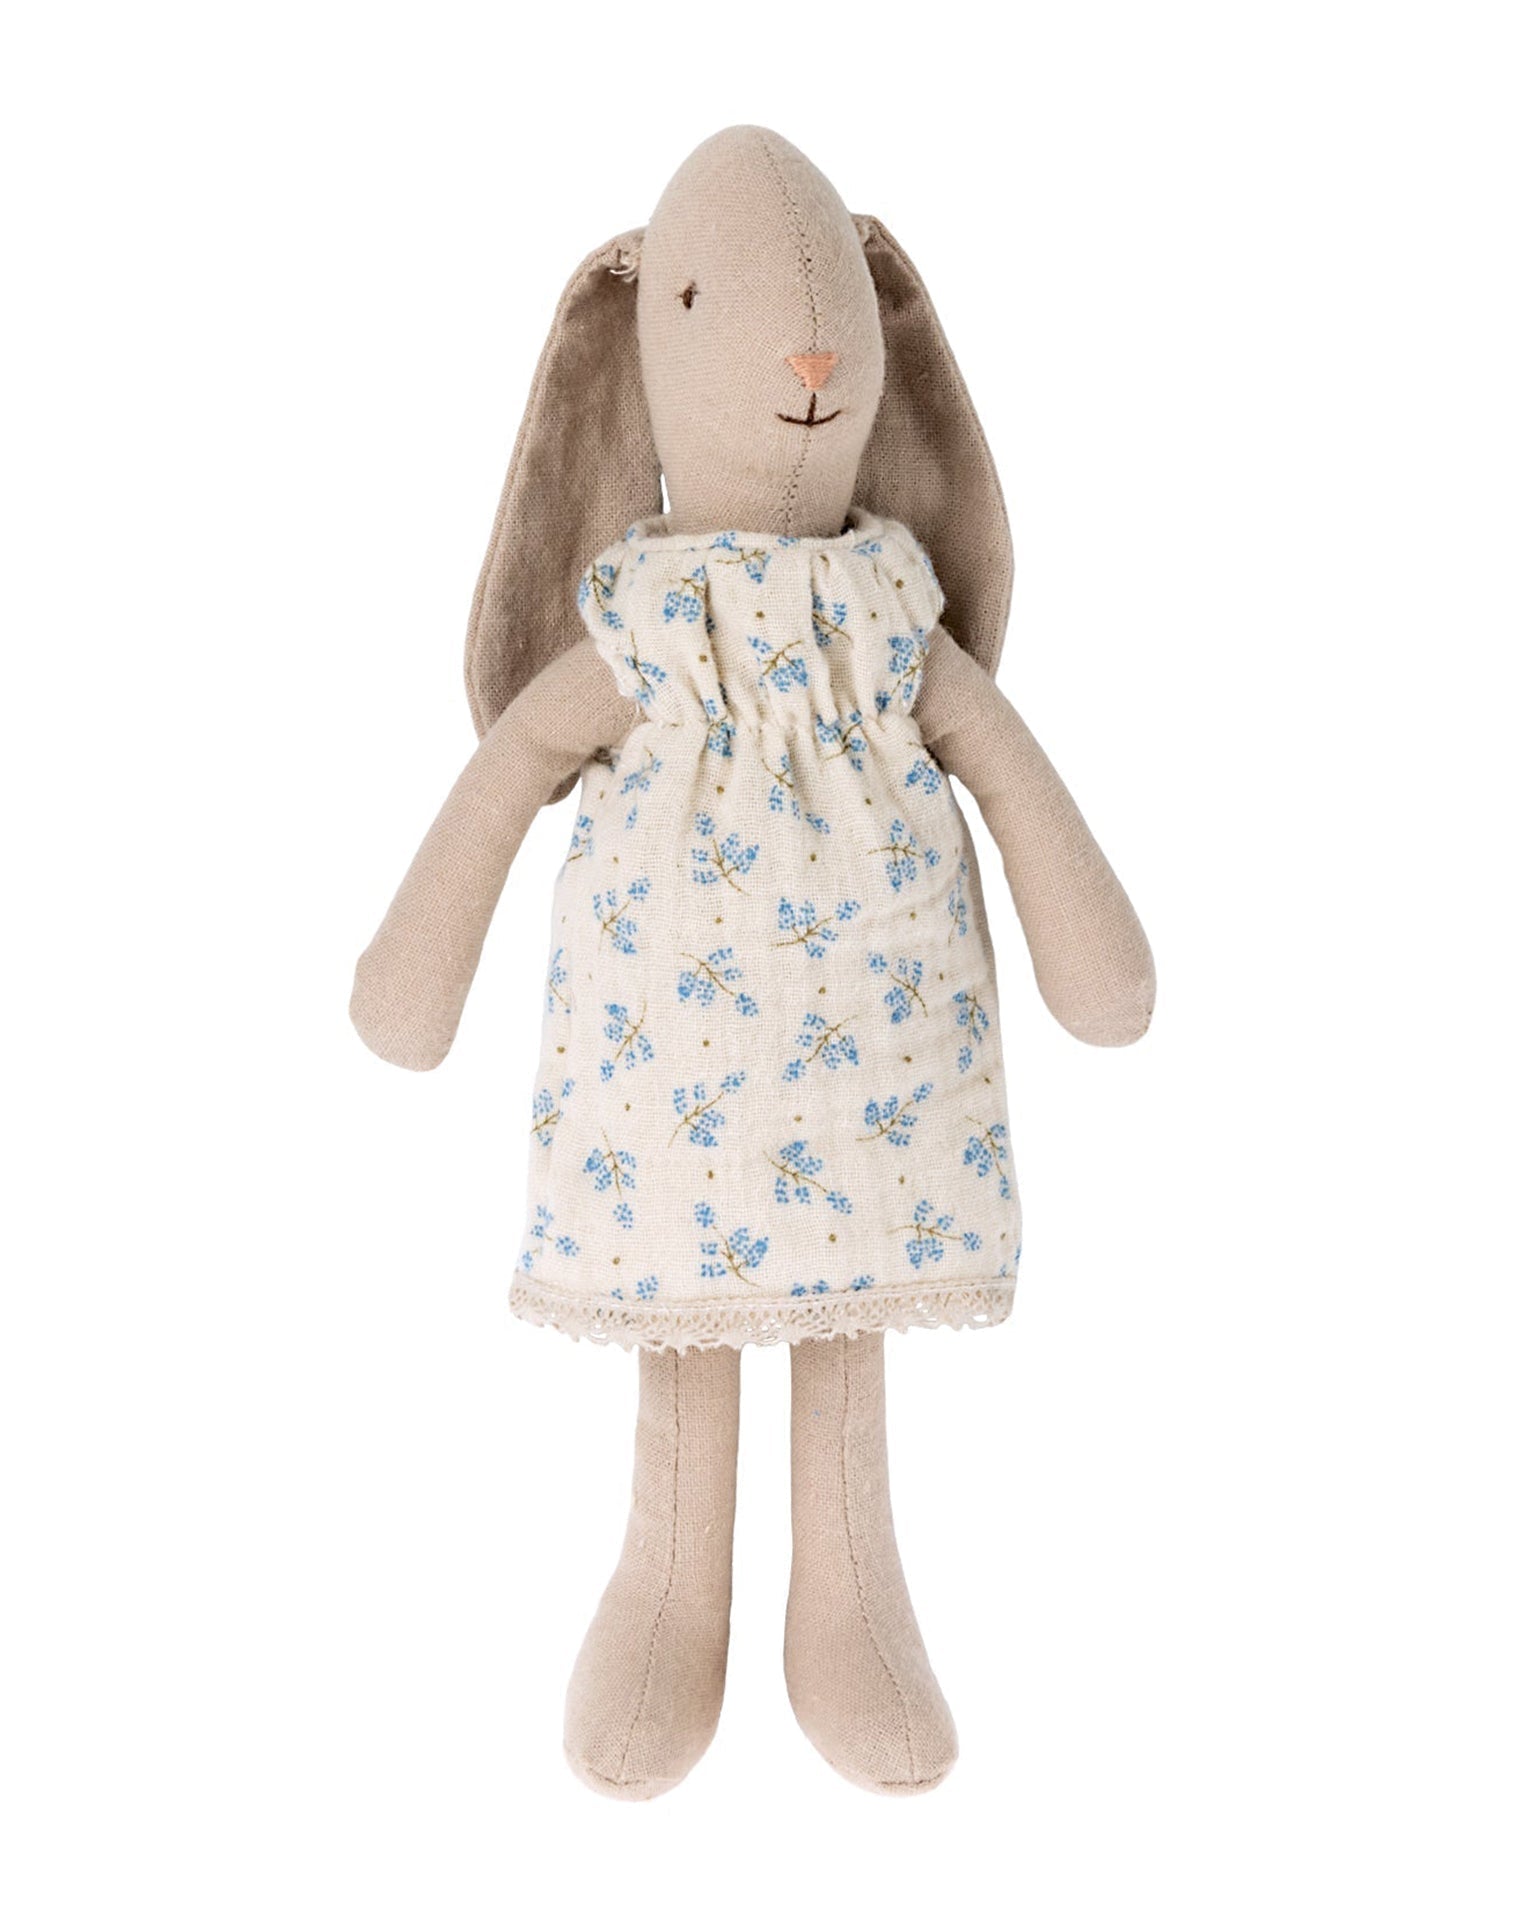 Little maileg play bunny size 1 in dress